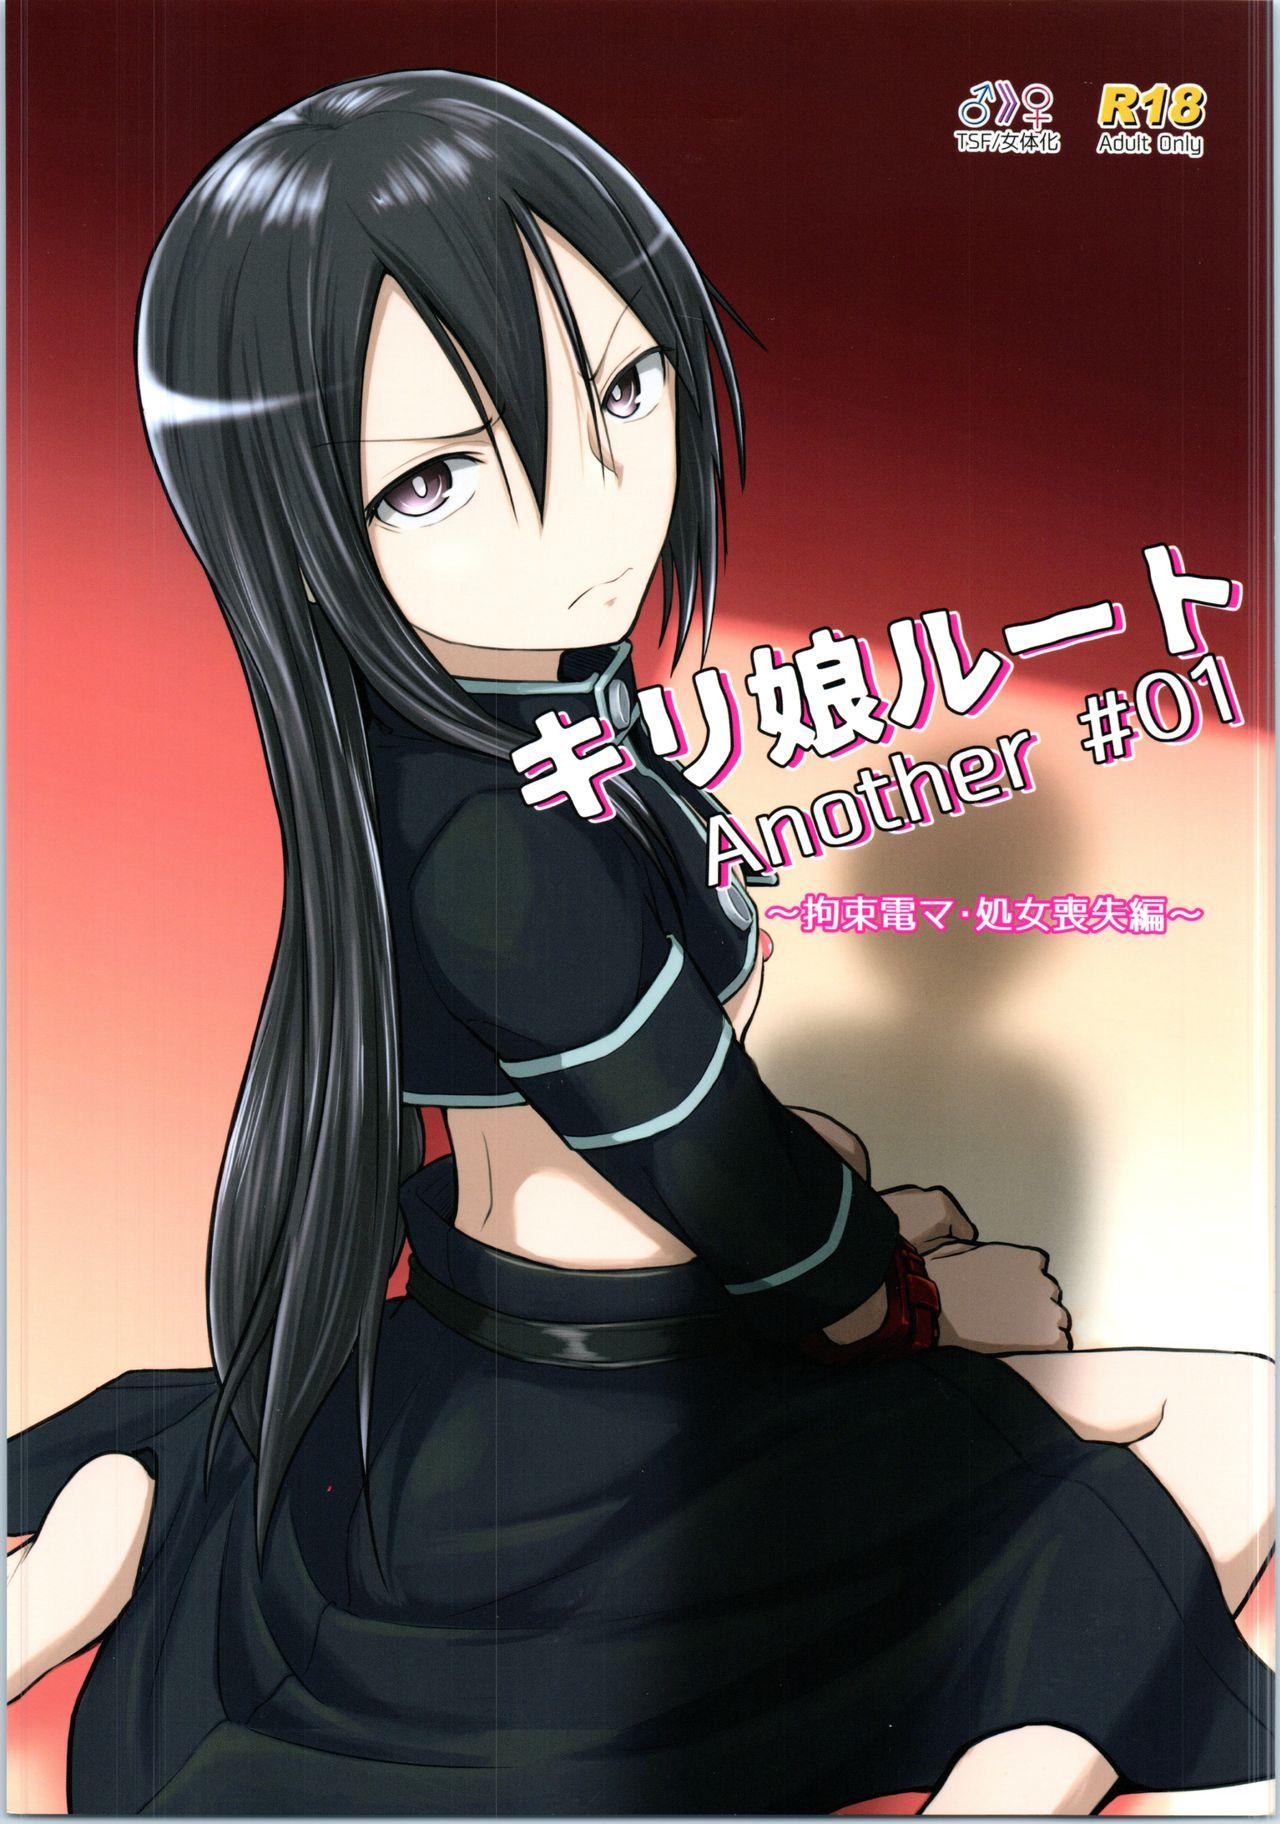 Home Another 01 - Sword art online Girl Girl - Picture 1